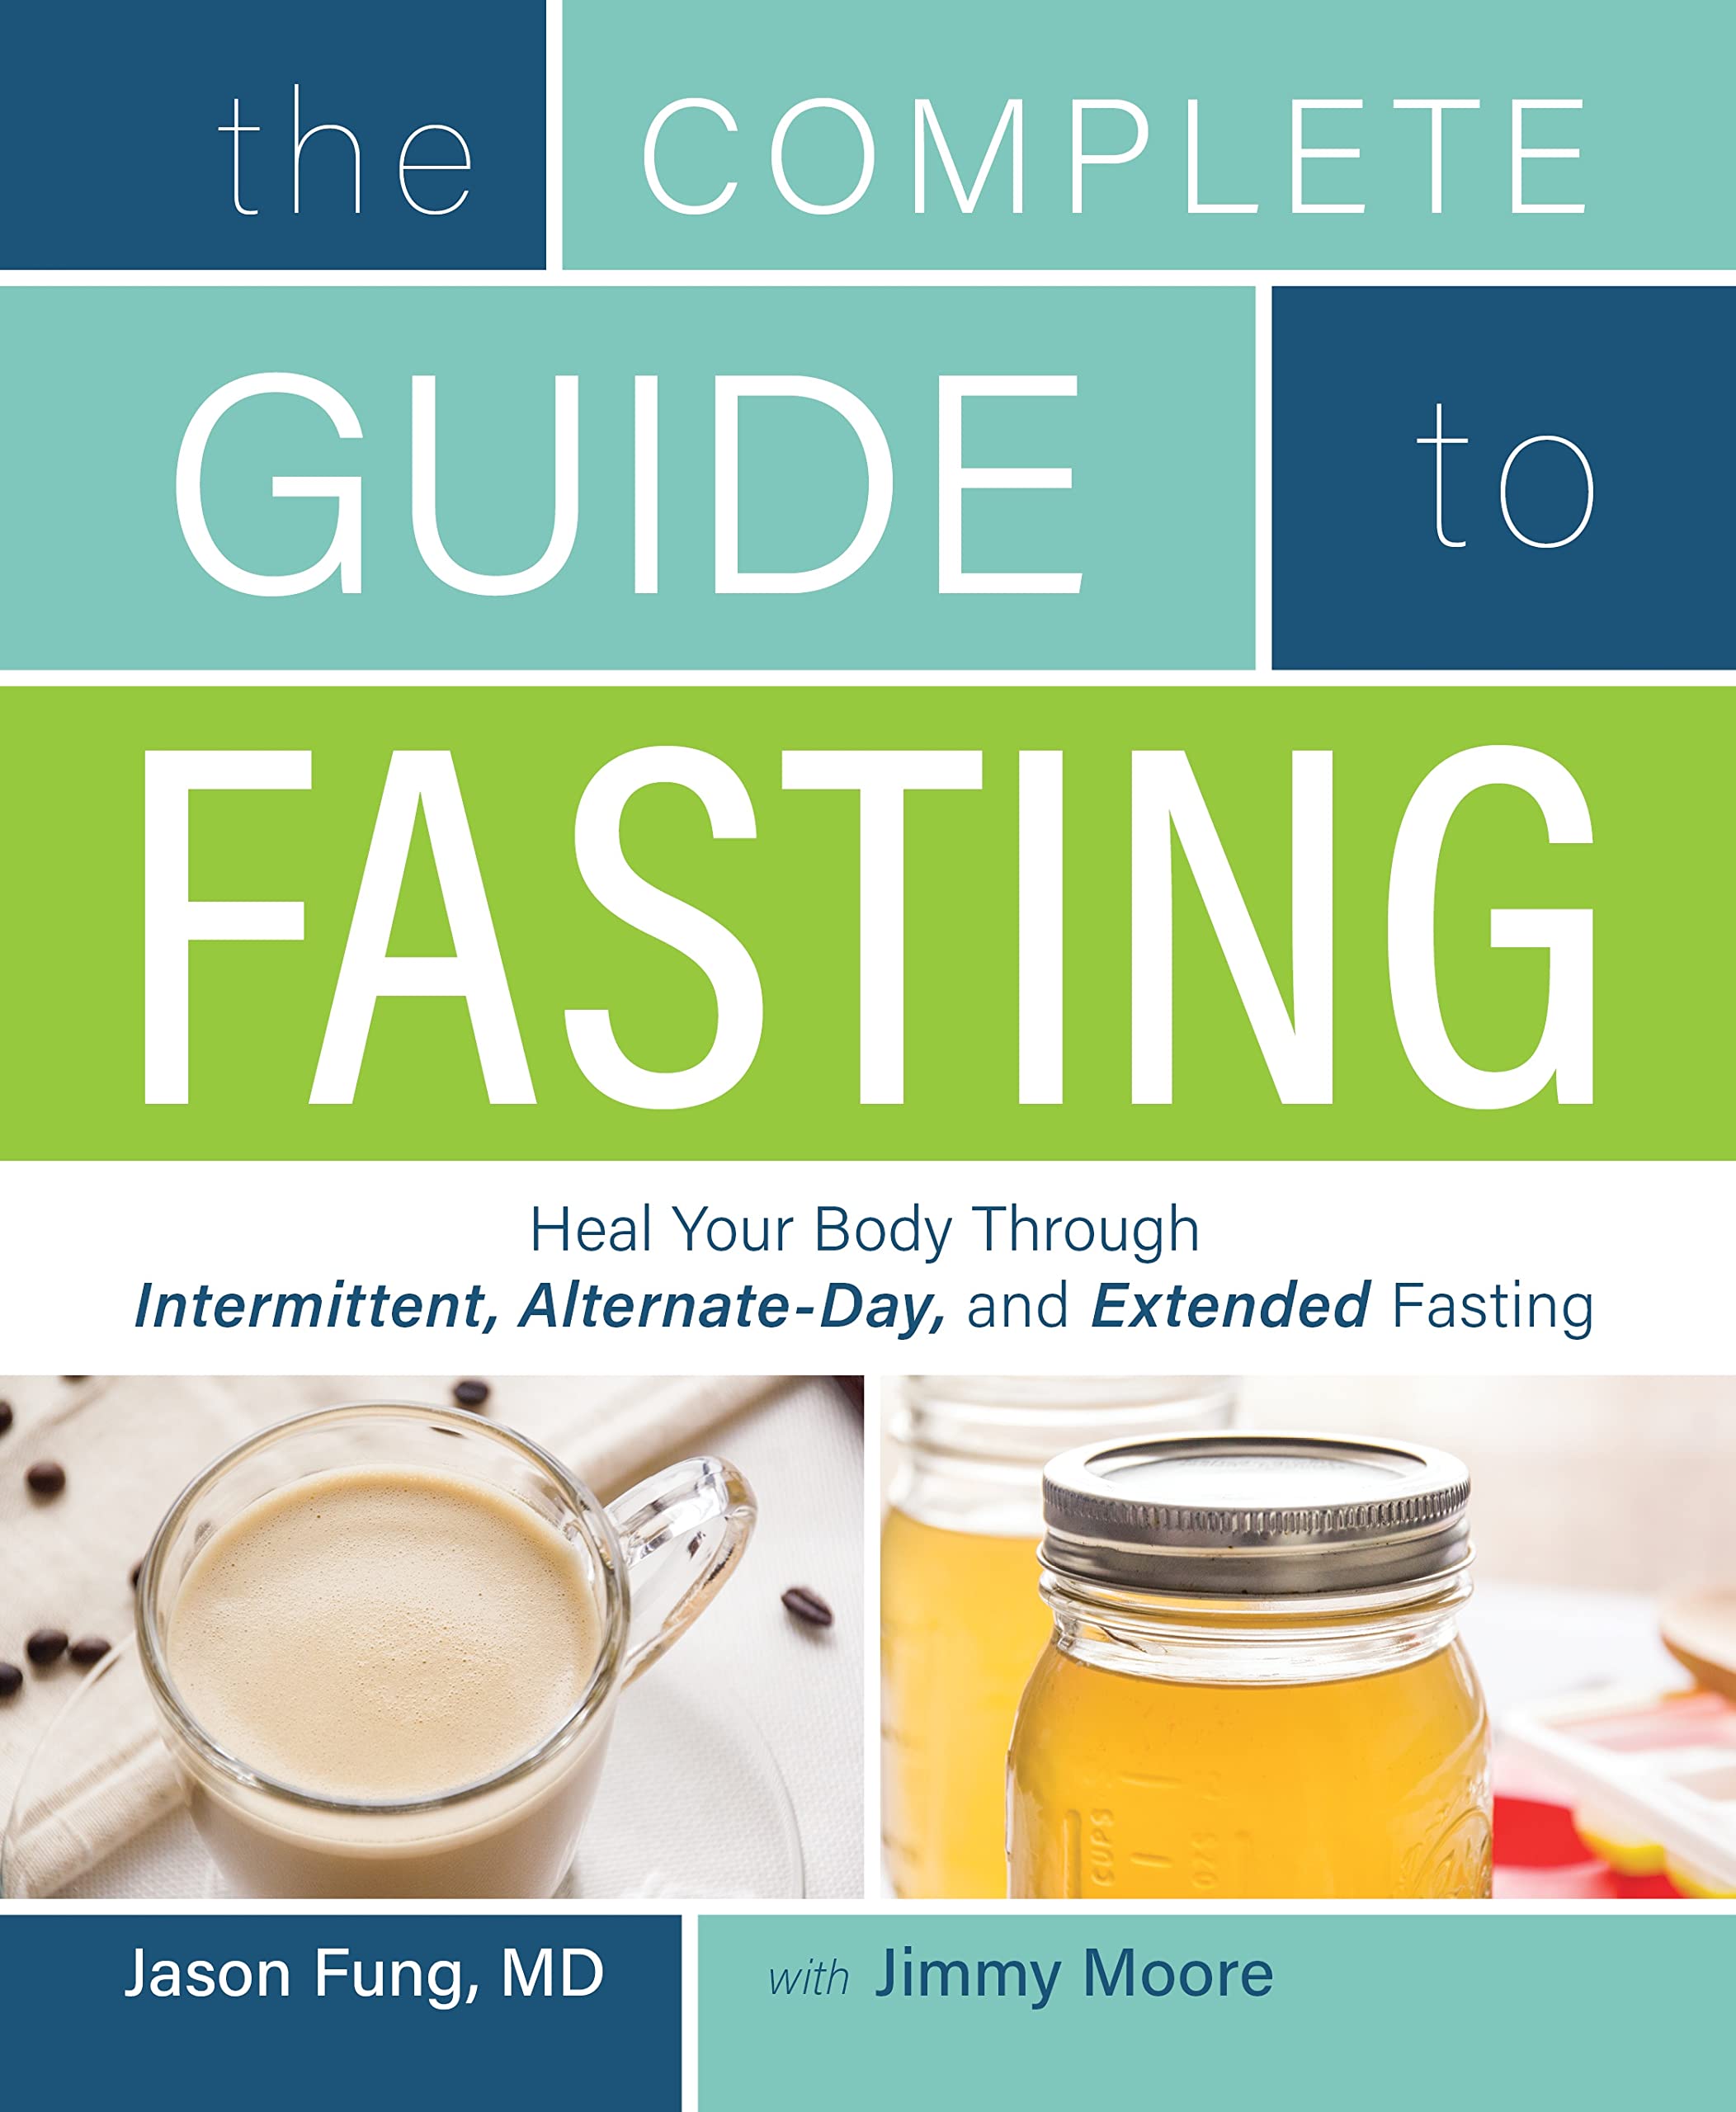 The Complete Guide to Fasting nuriakenya